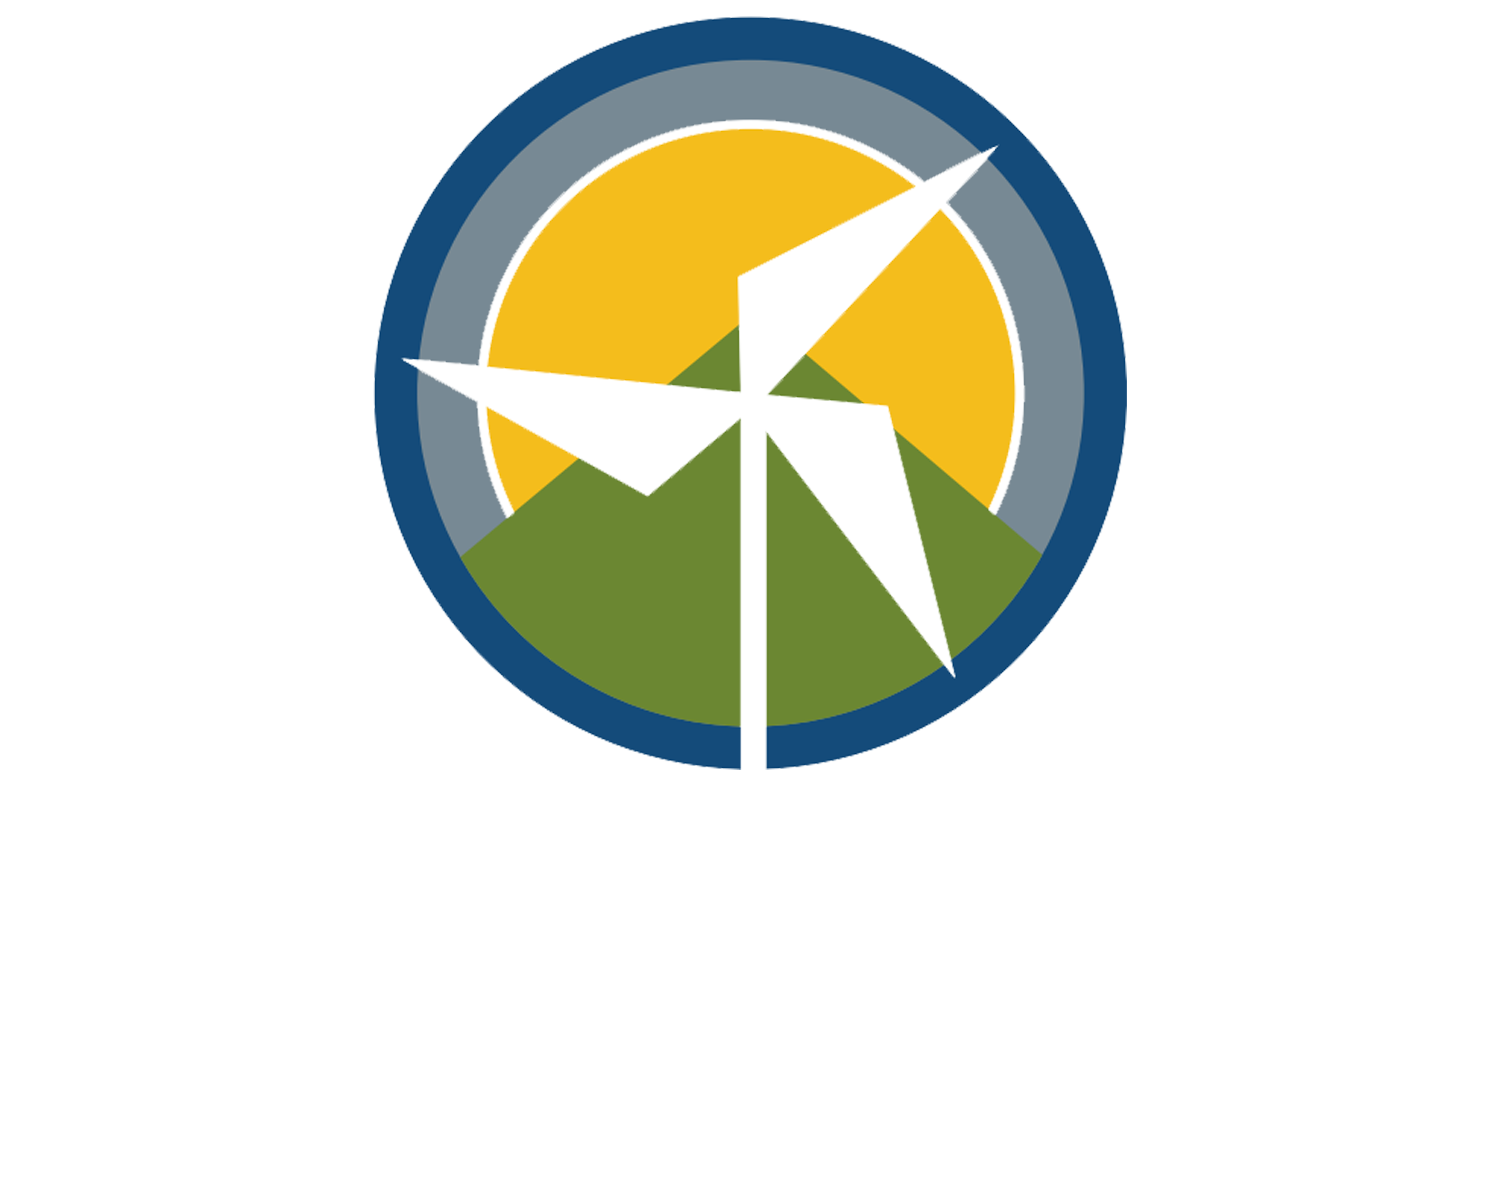 Clean Energy Action